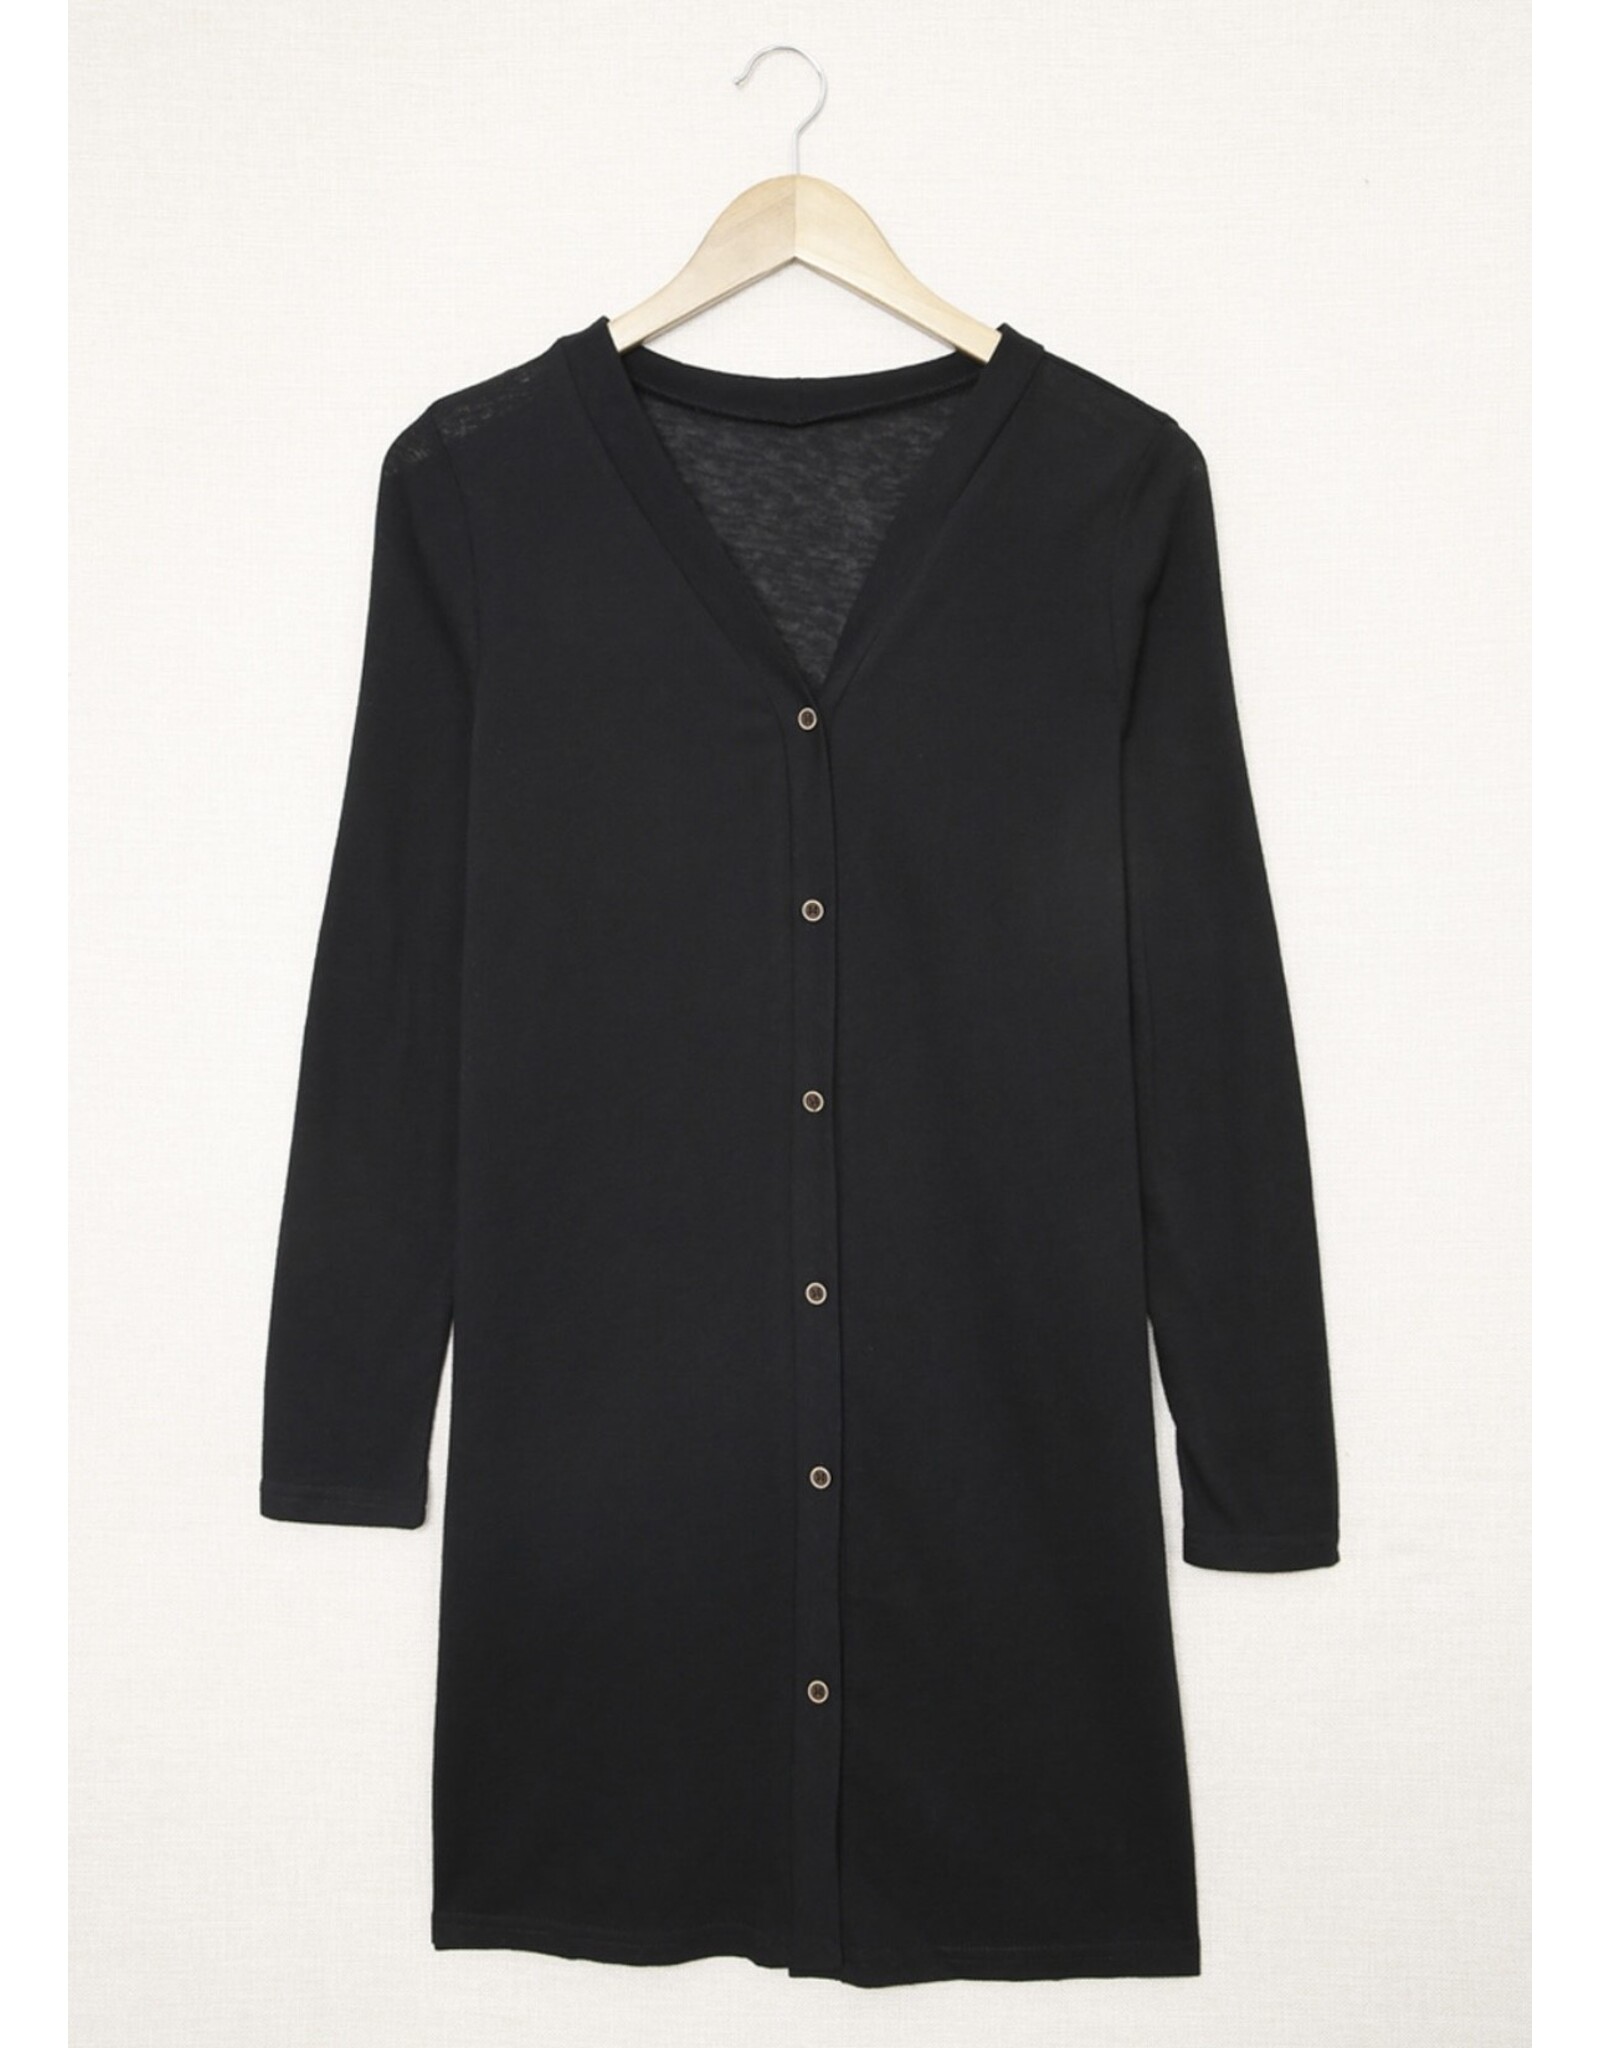 LATA Open front buttoned cardigan